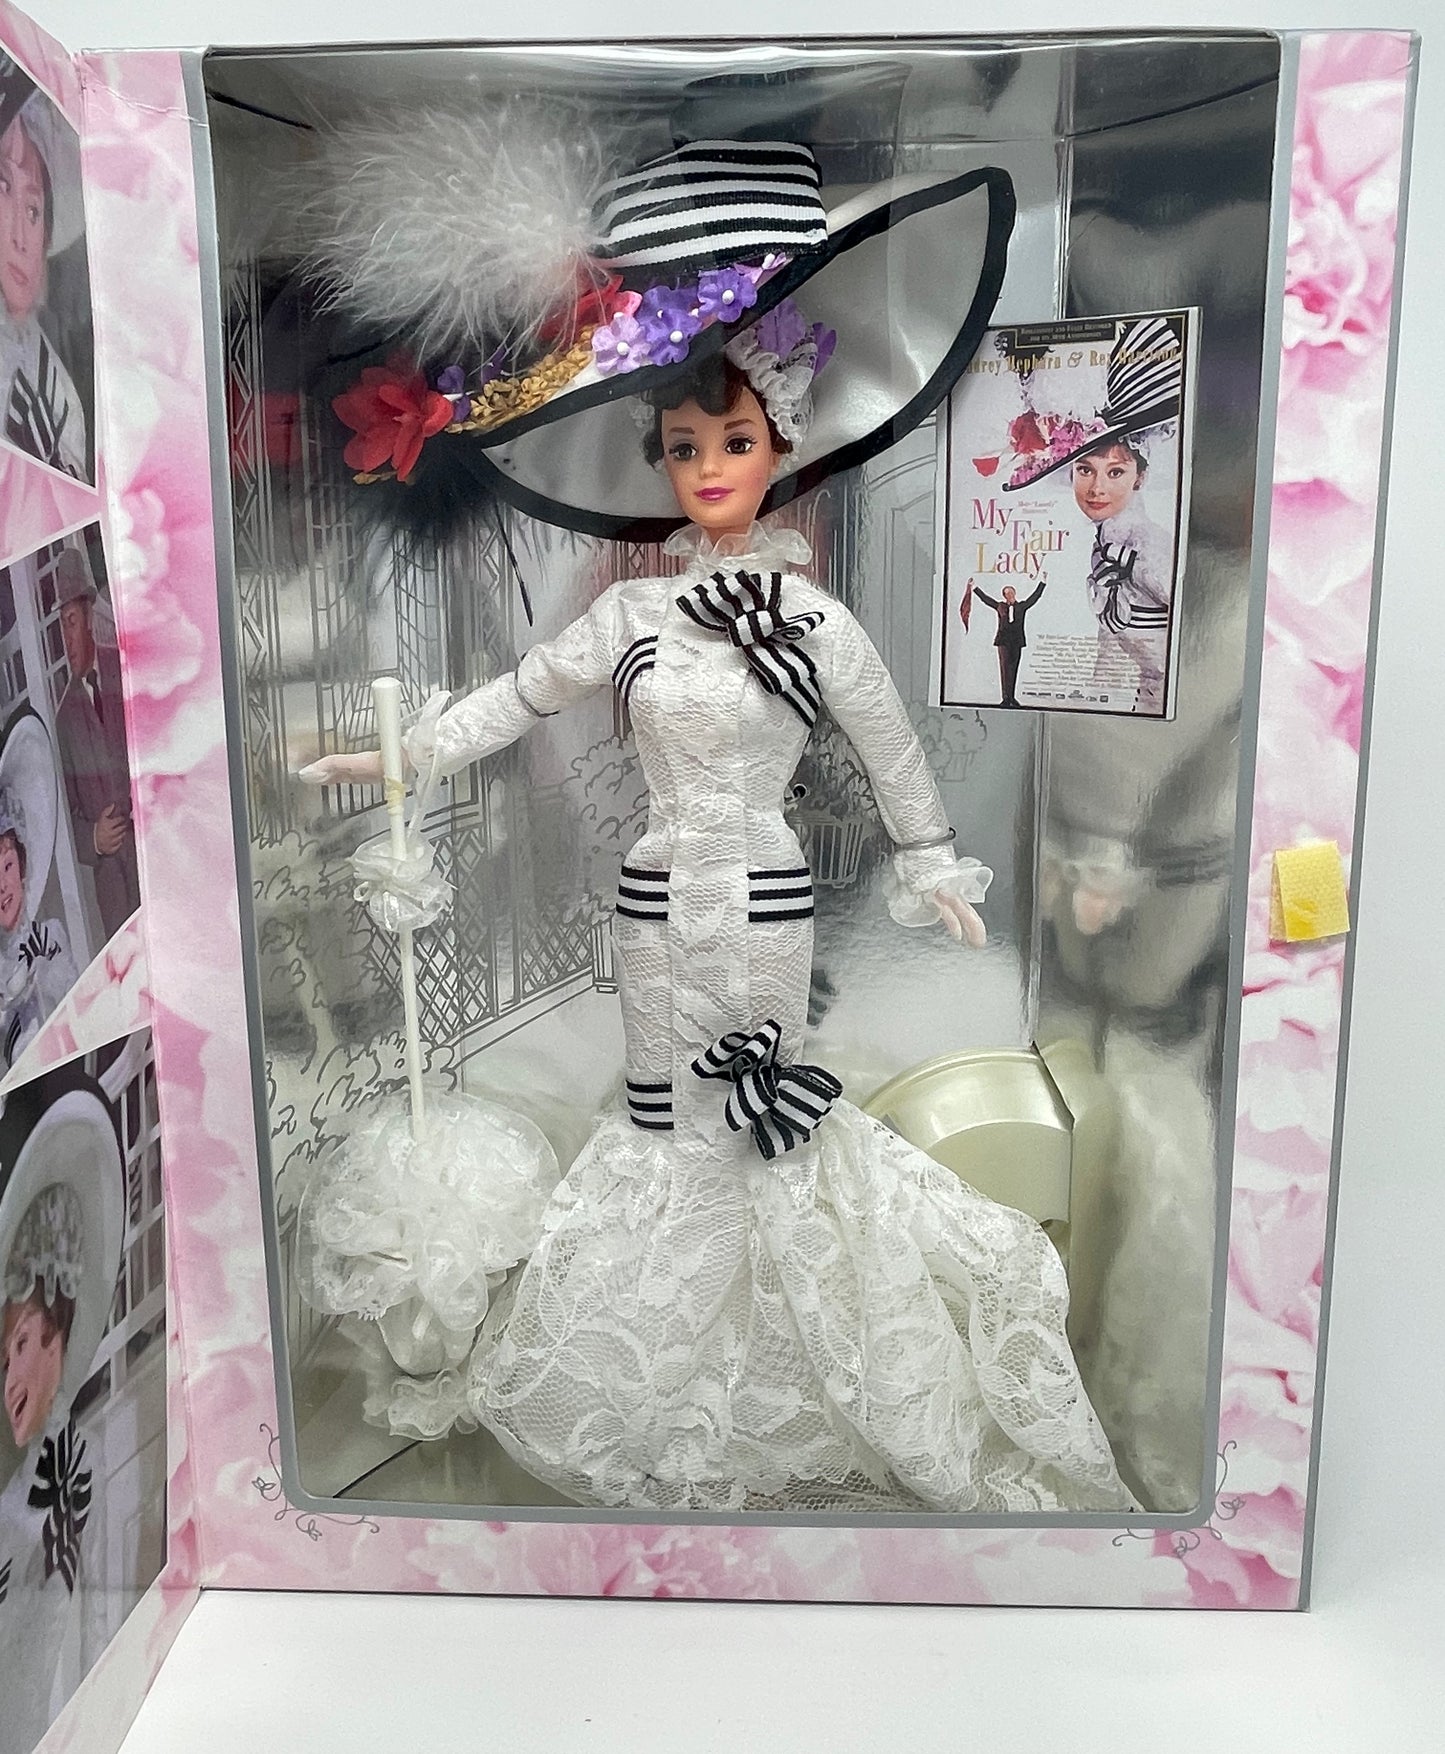 BARBIE AS ELIZA DOOLITTLE IN MY FAIR LADY - HOLLYWOOD LEGENDS COLLECTION - 1995 MATTEL